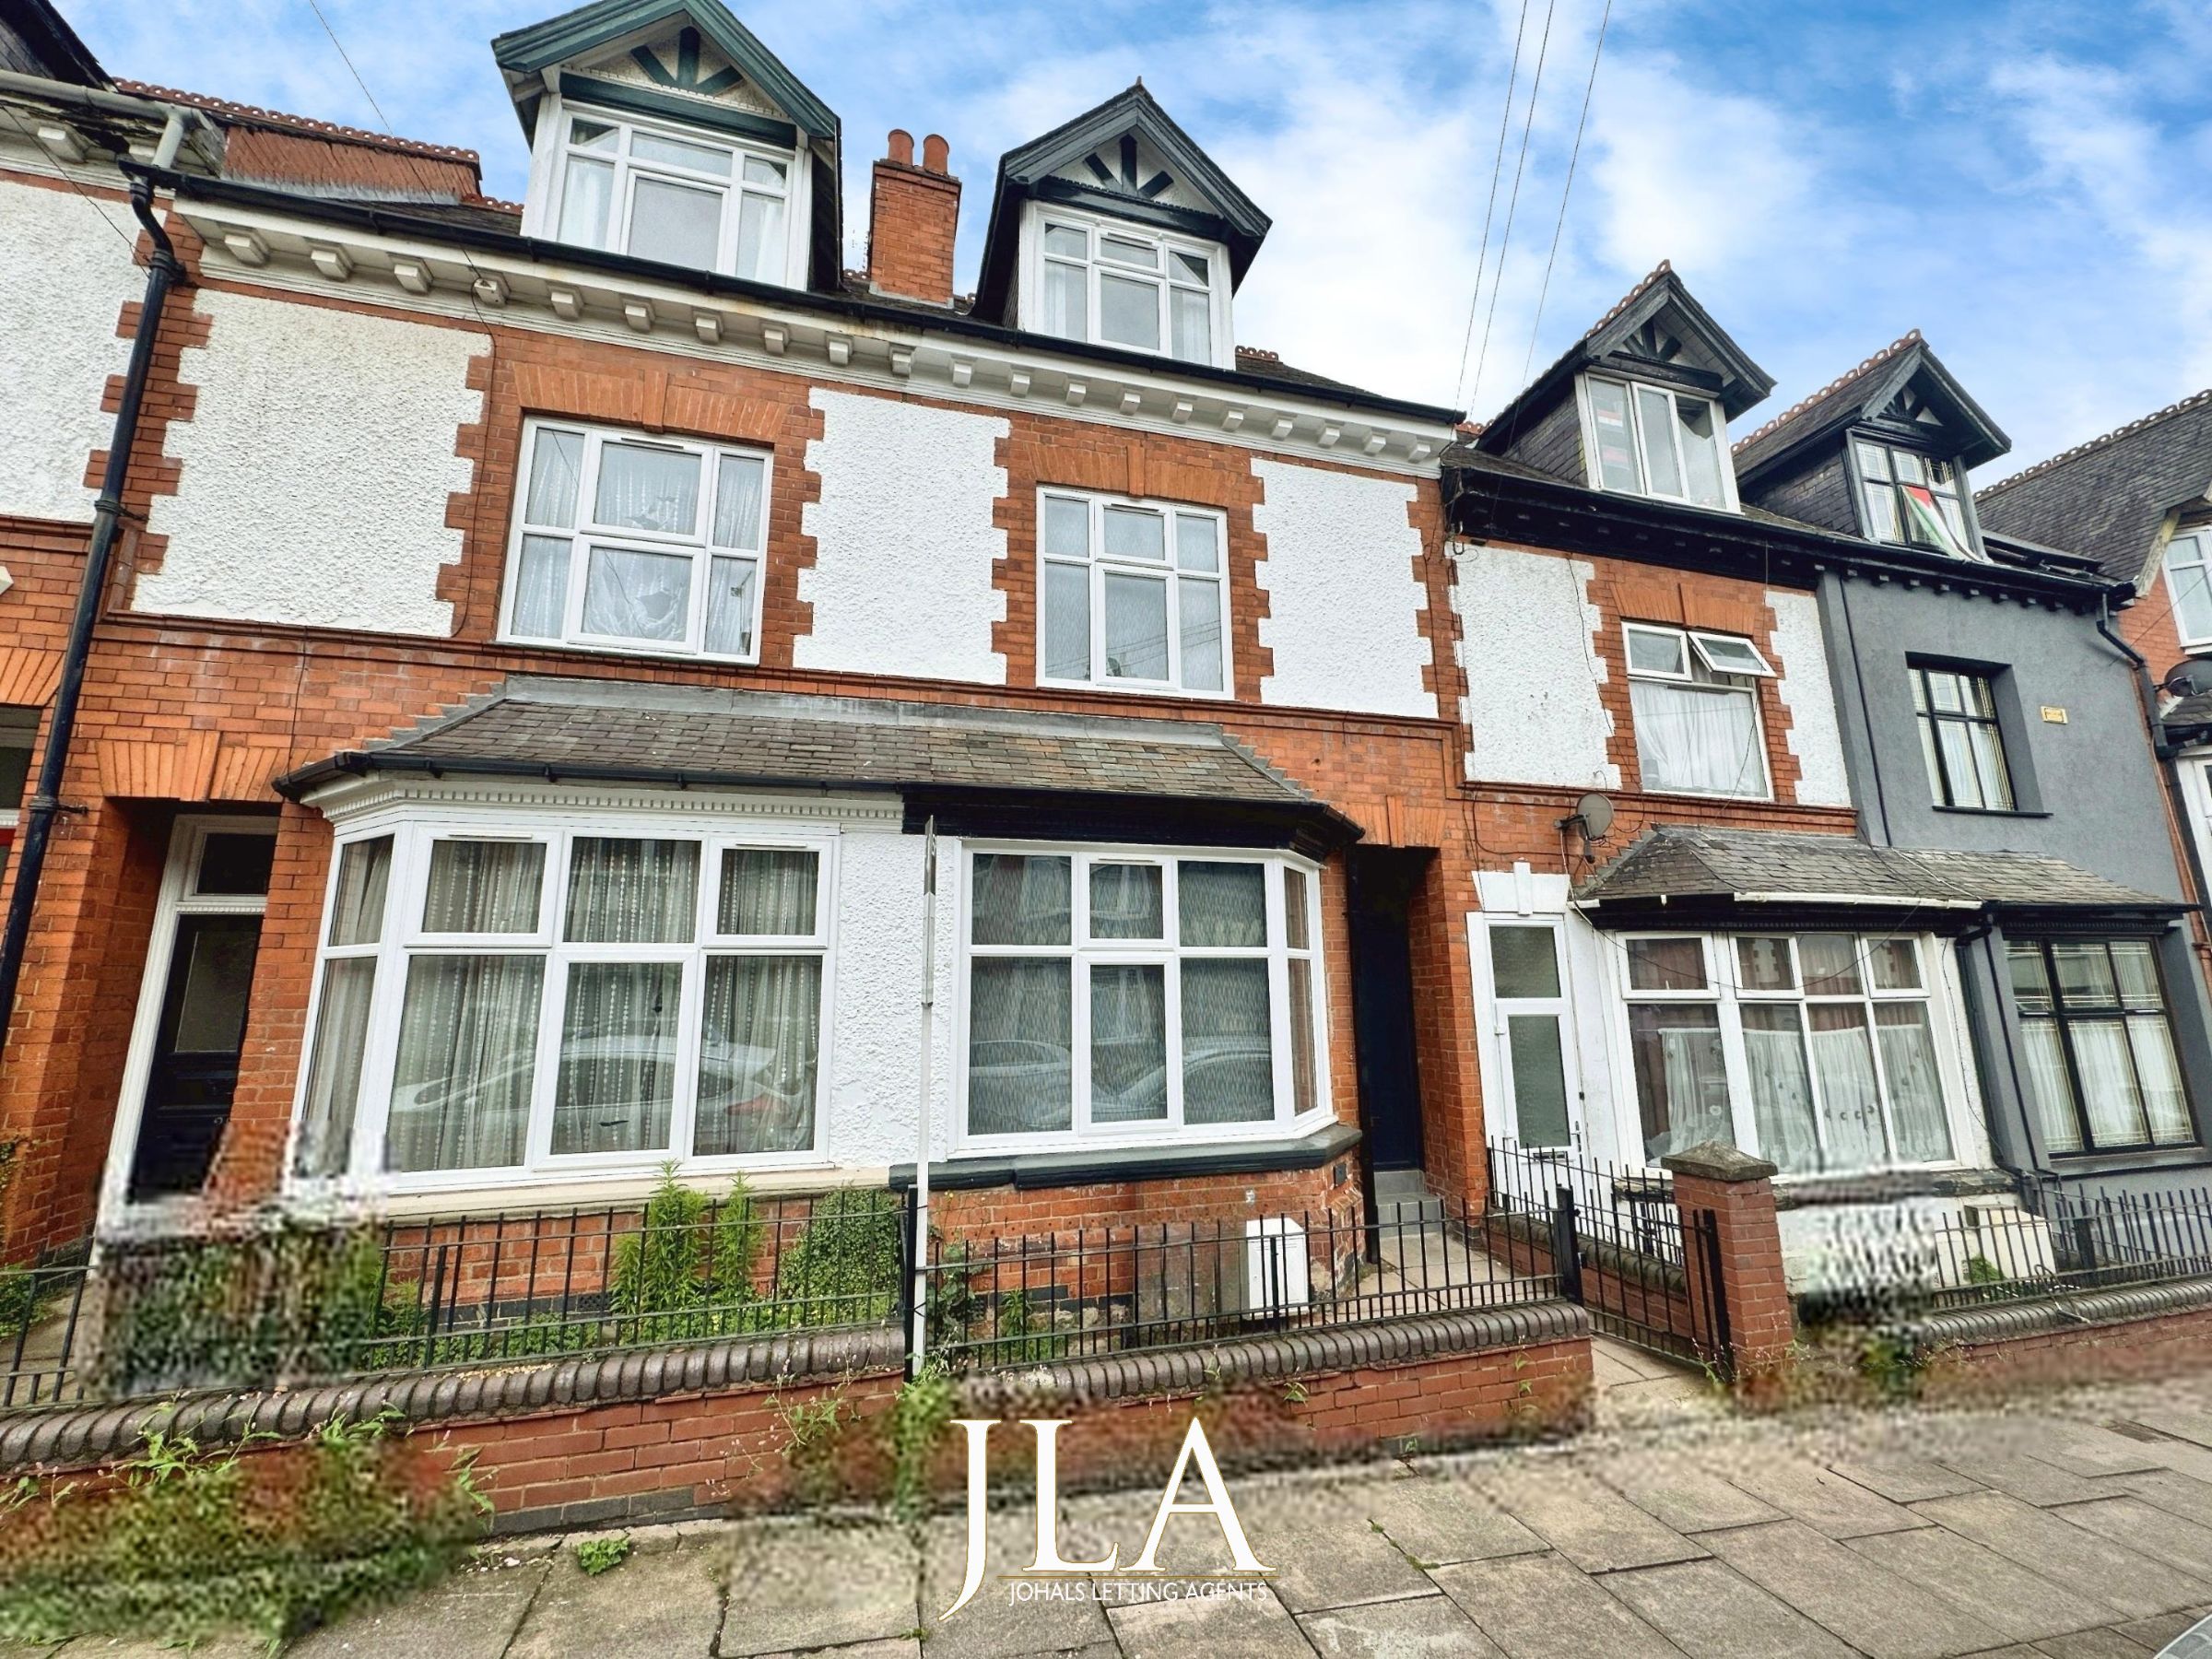 5 bed terraced house to rent in Chaucer Street, Leicester, LE2 